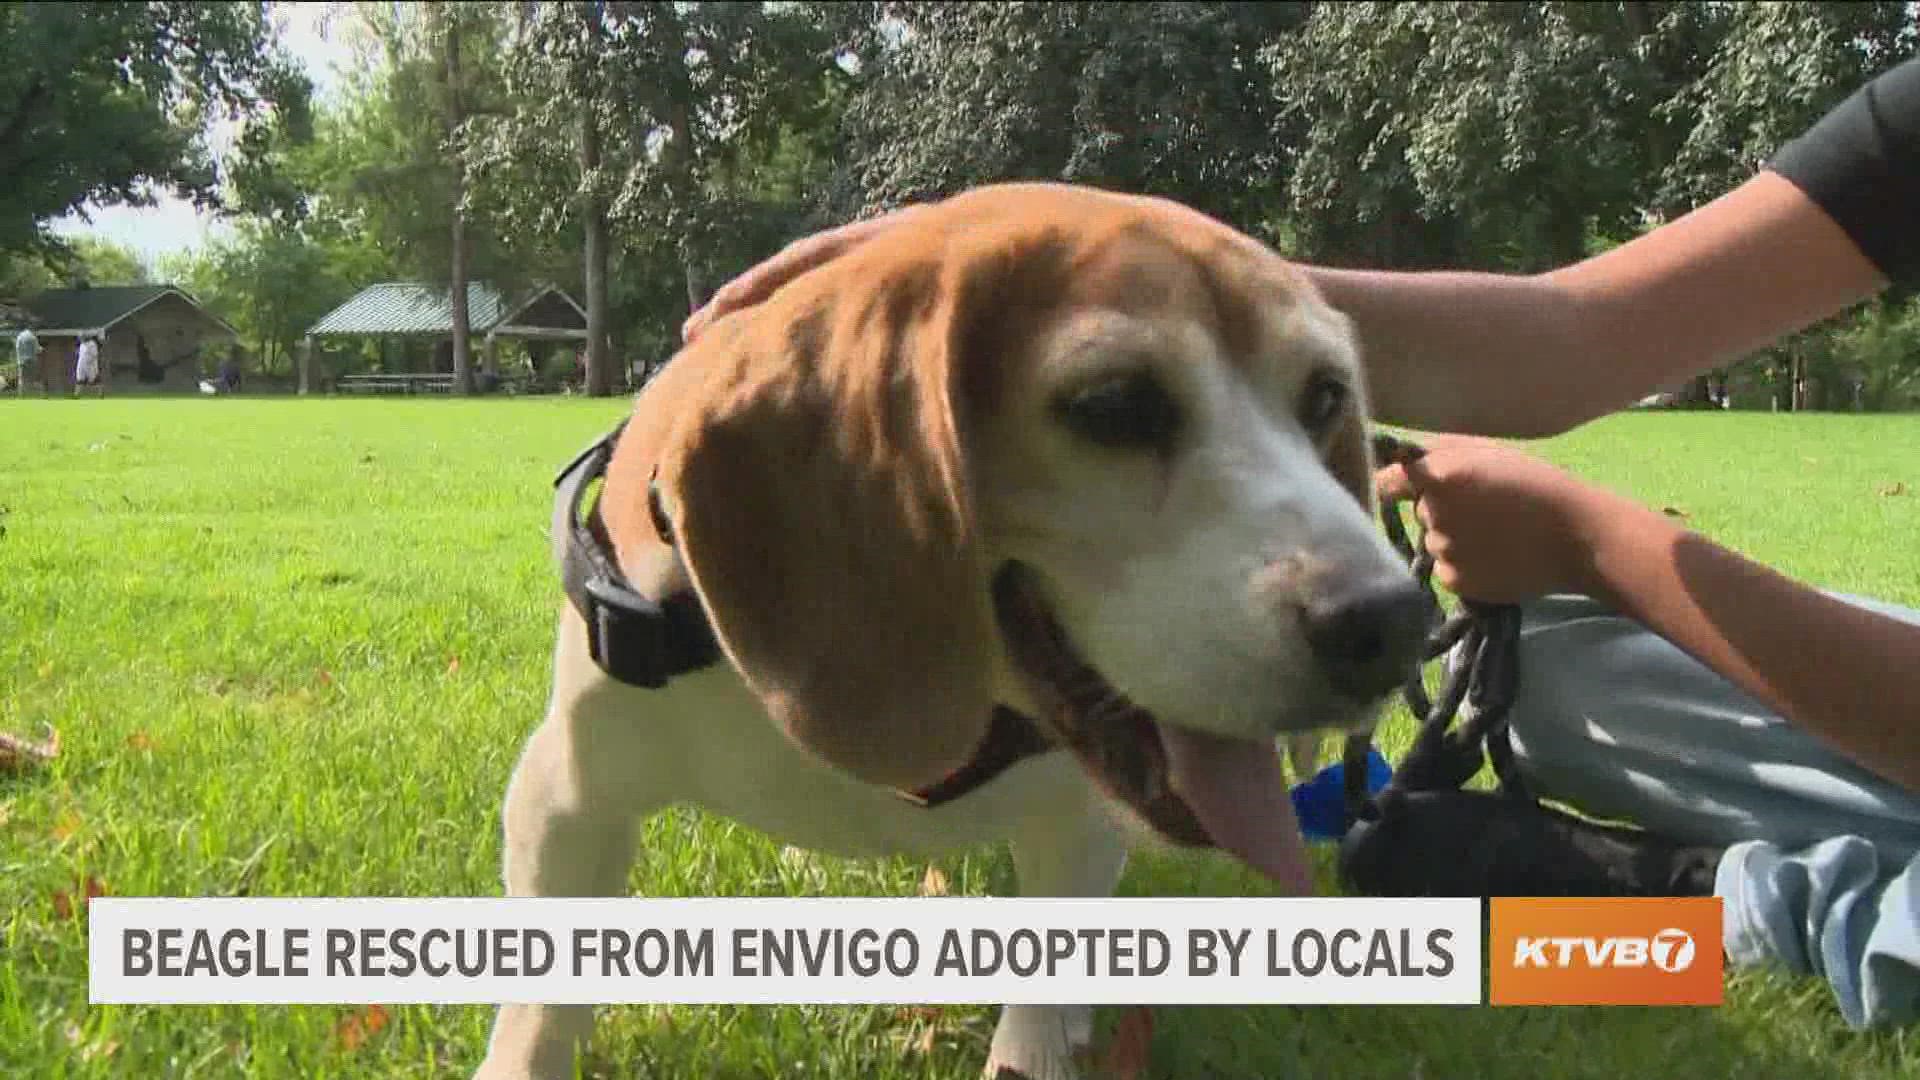 Samson is one of 4,000 dogs rescued in July 2022 from a facility in Virginia.